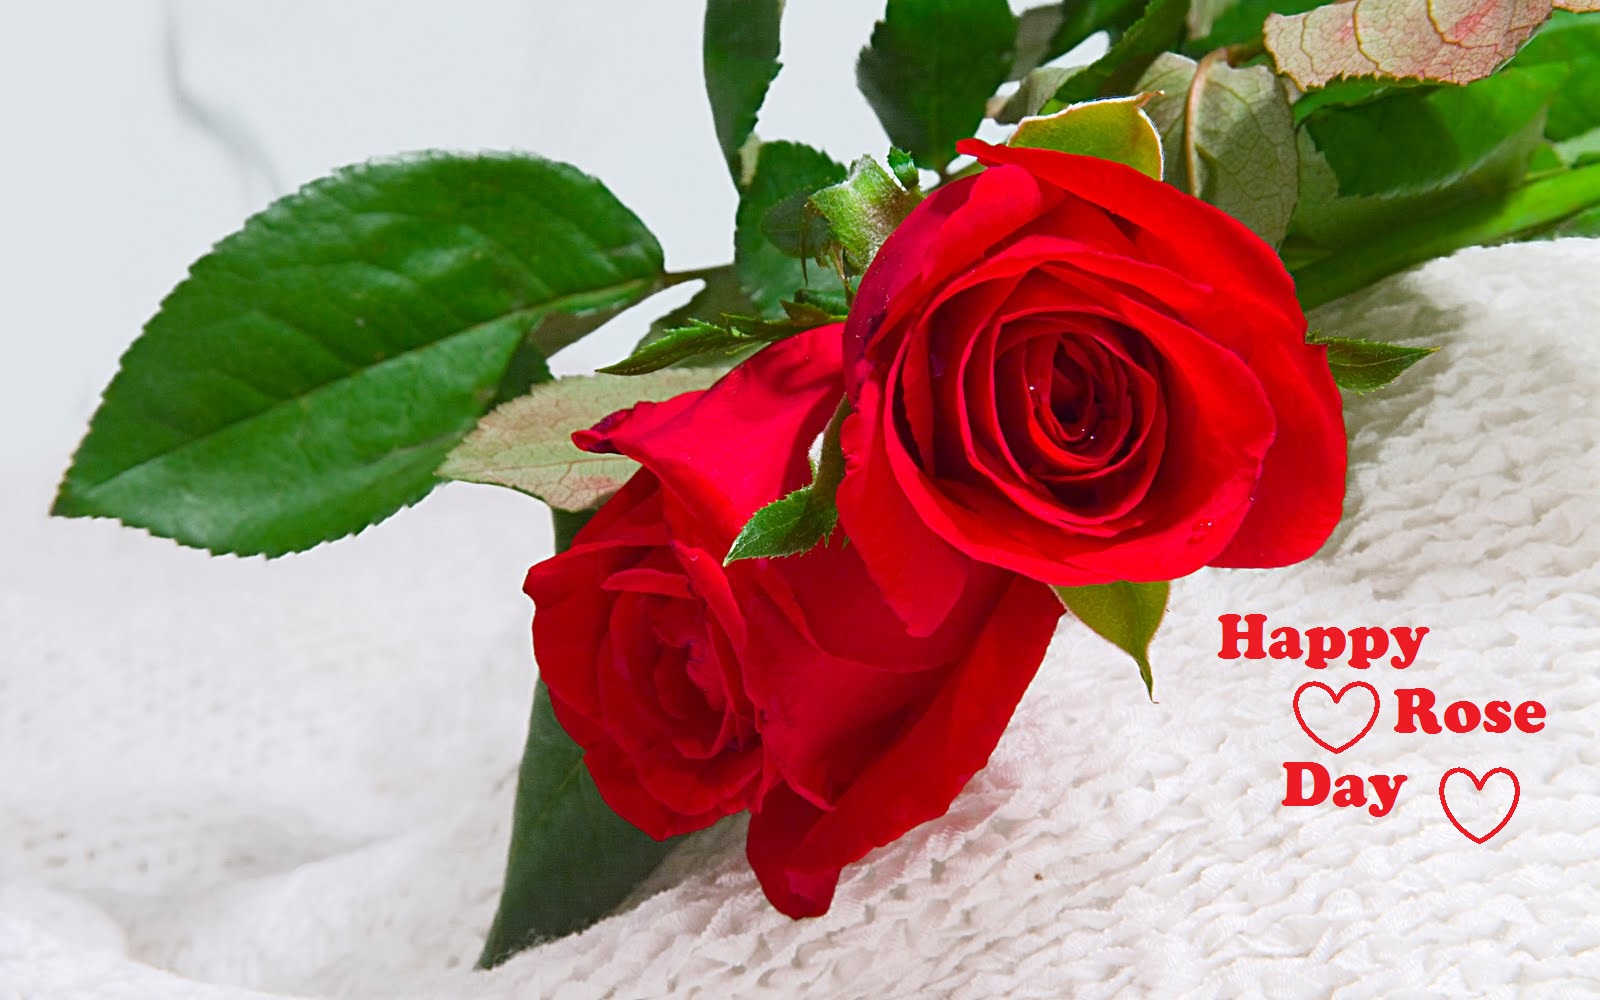 Happy Roses Day Images With Wishes | Best Wishes